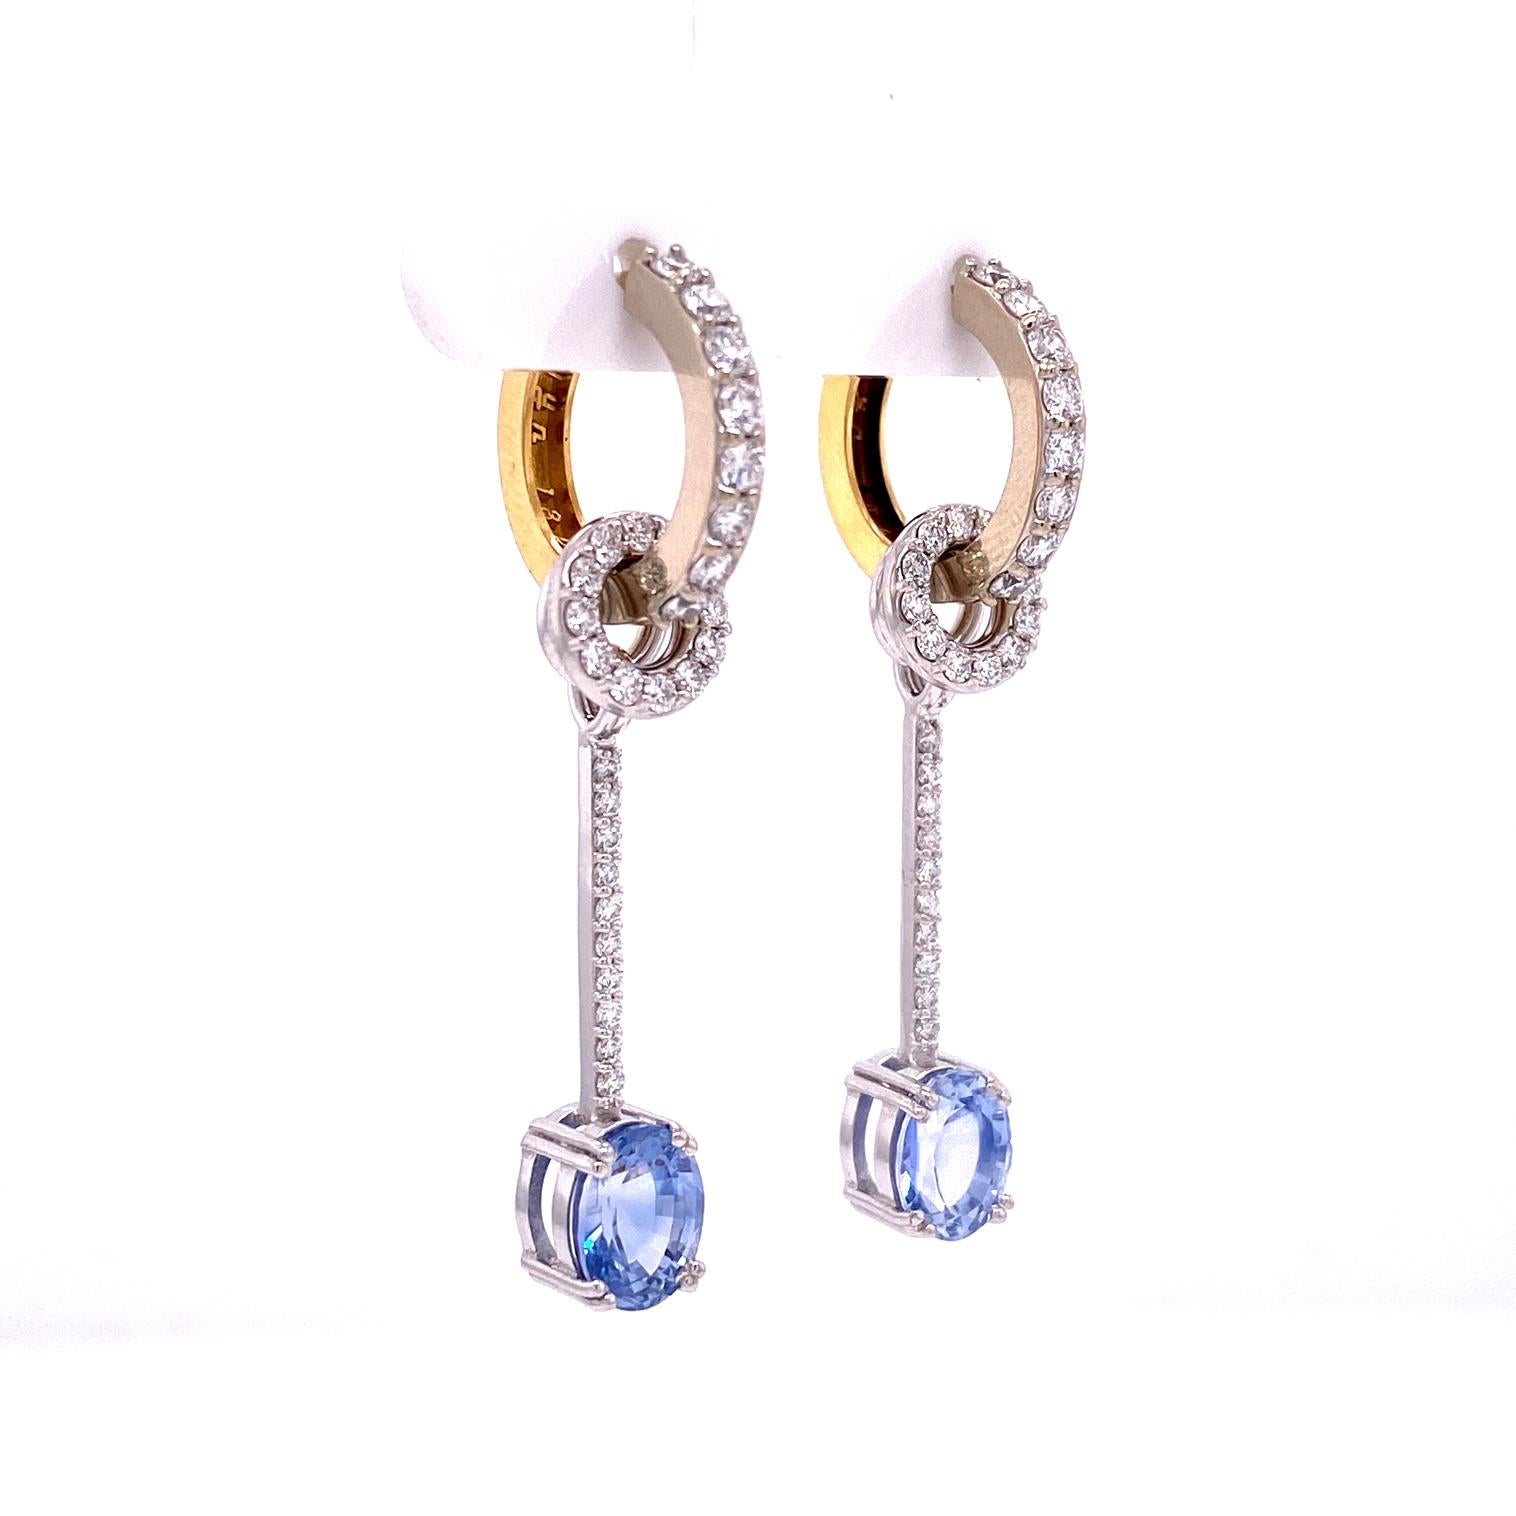 A pair of 18k white and 18k yellow and white gold reversible 